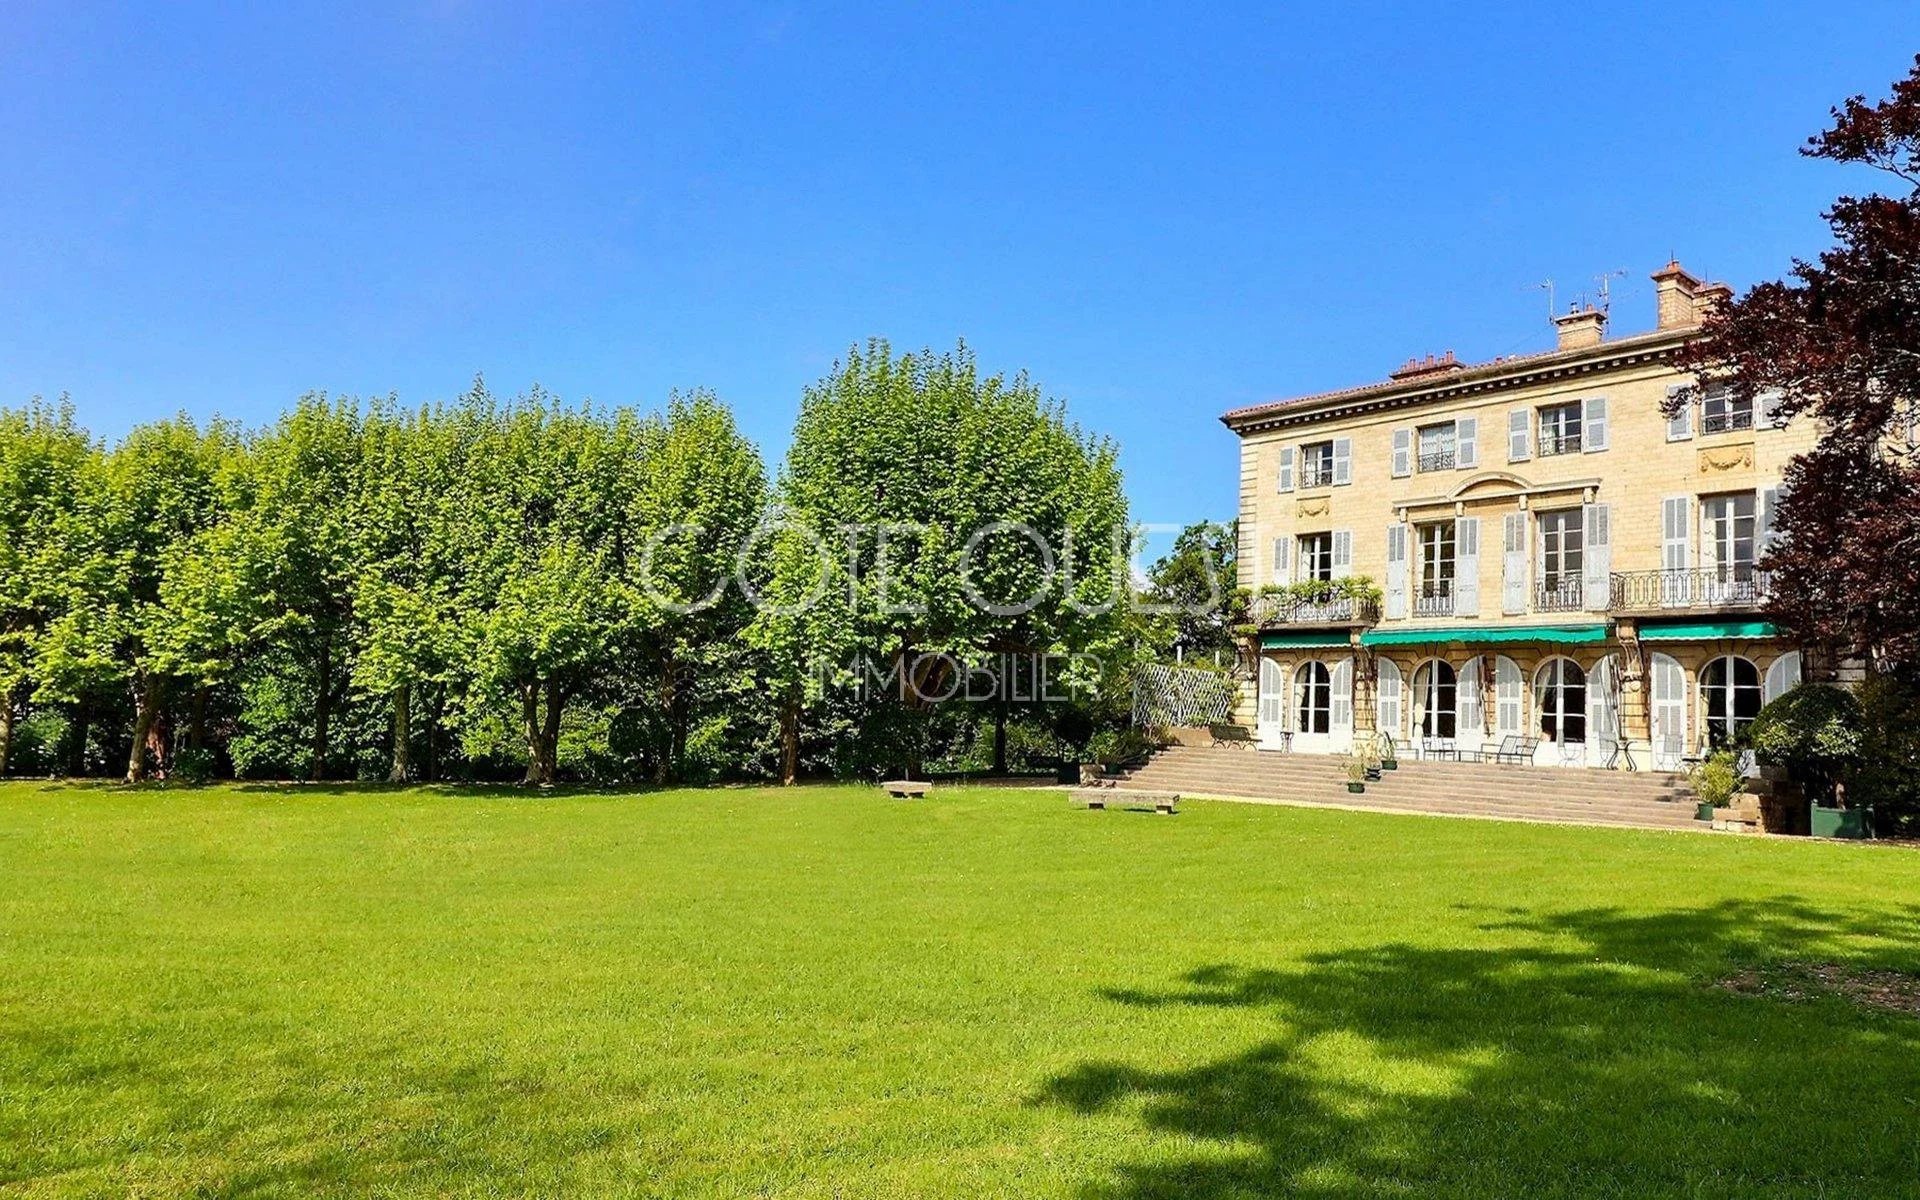 A UNIQUE PROPERTY SET IN 1.4 HECTARES IN THE CENTRE OF BIARRITZ